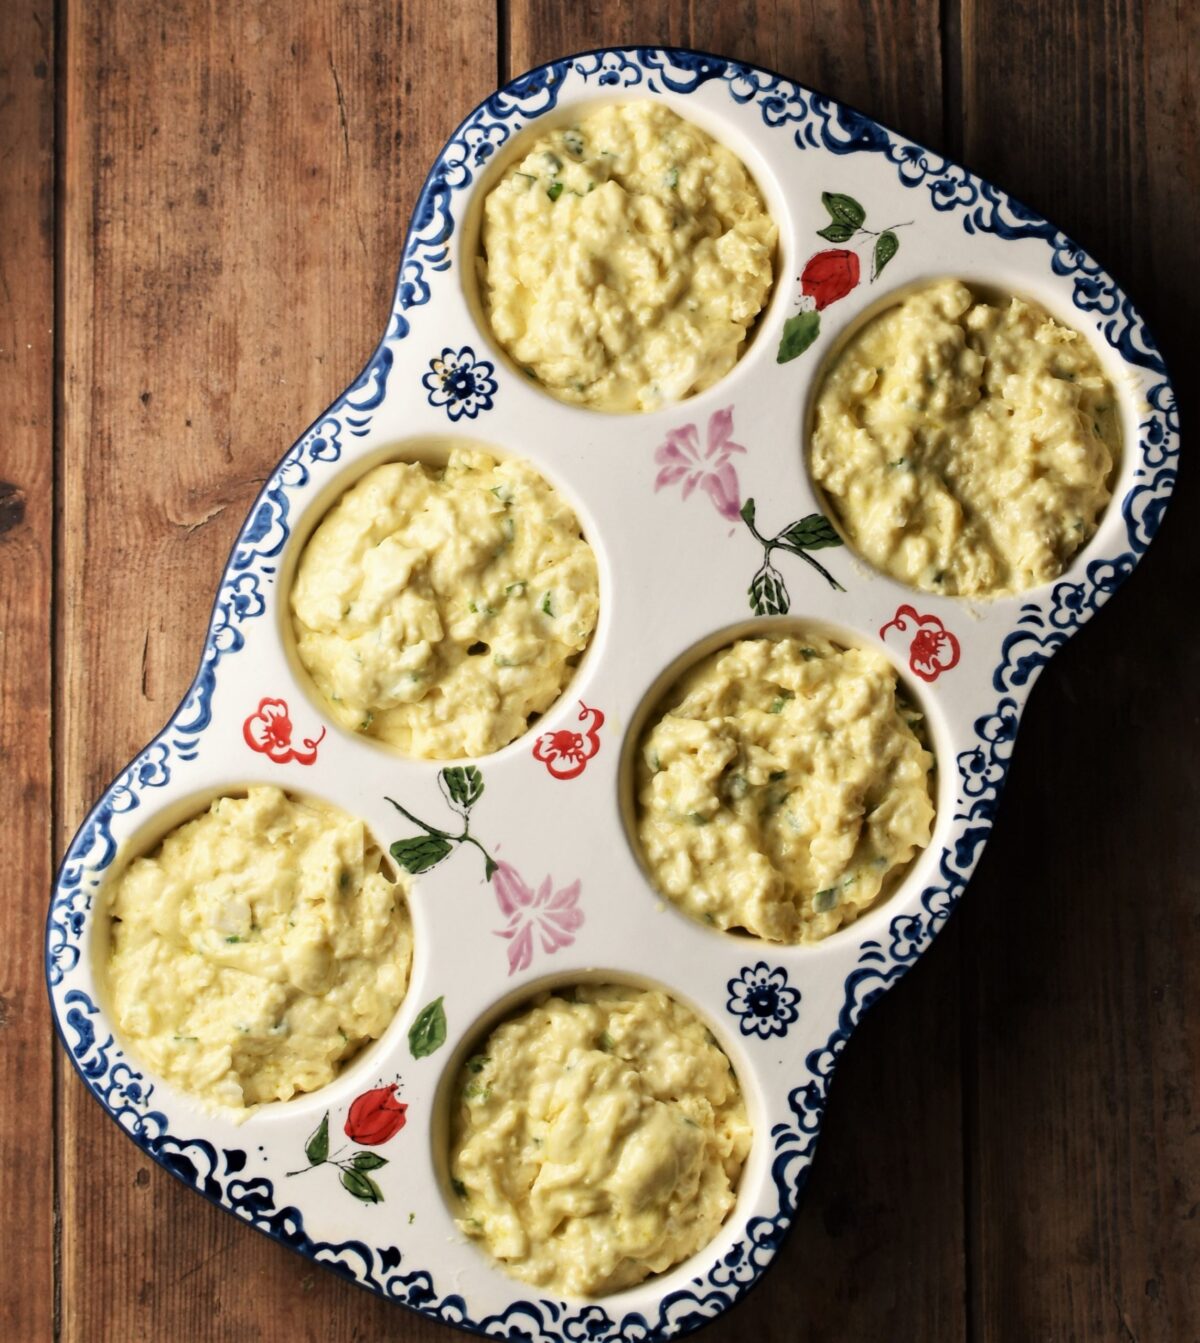 Lumpy batter in 6-hole white ceramic muffin pan with flowery blue pattern.